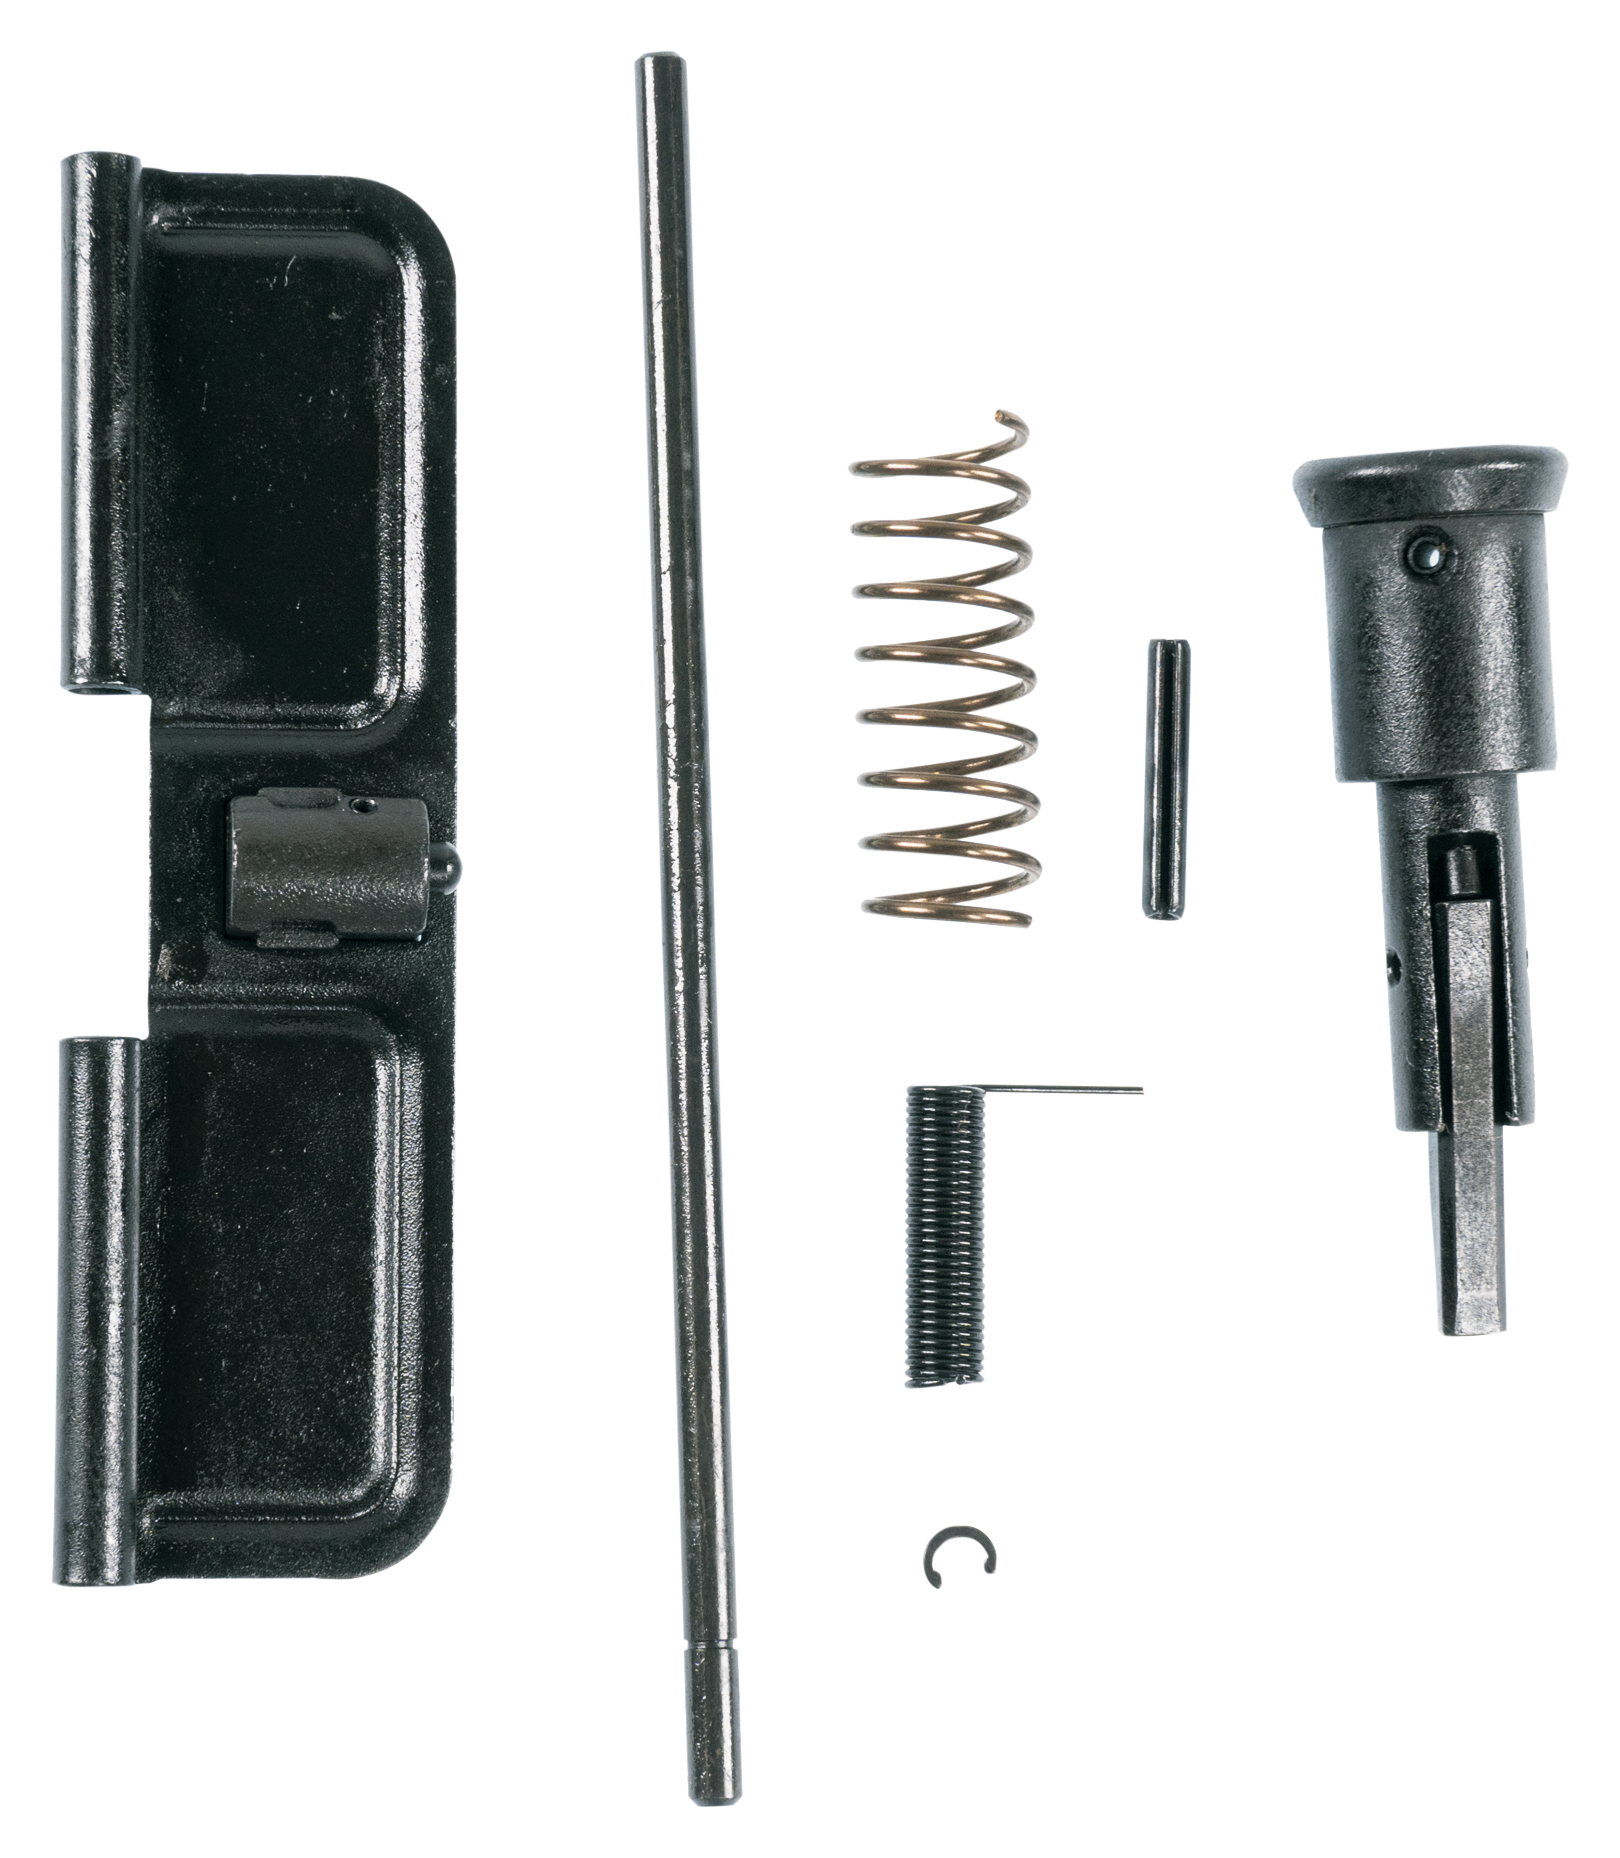 M&P AR15 Rifle Complete Upper Parts Kit -  Smith & Wesson, 110116